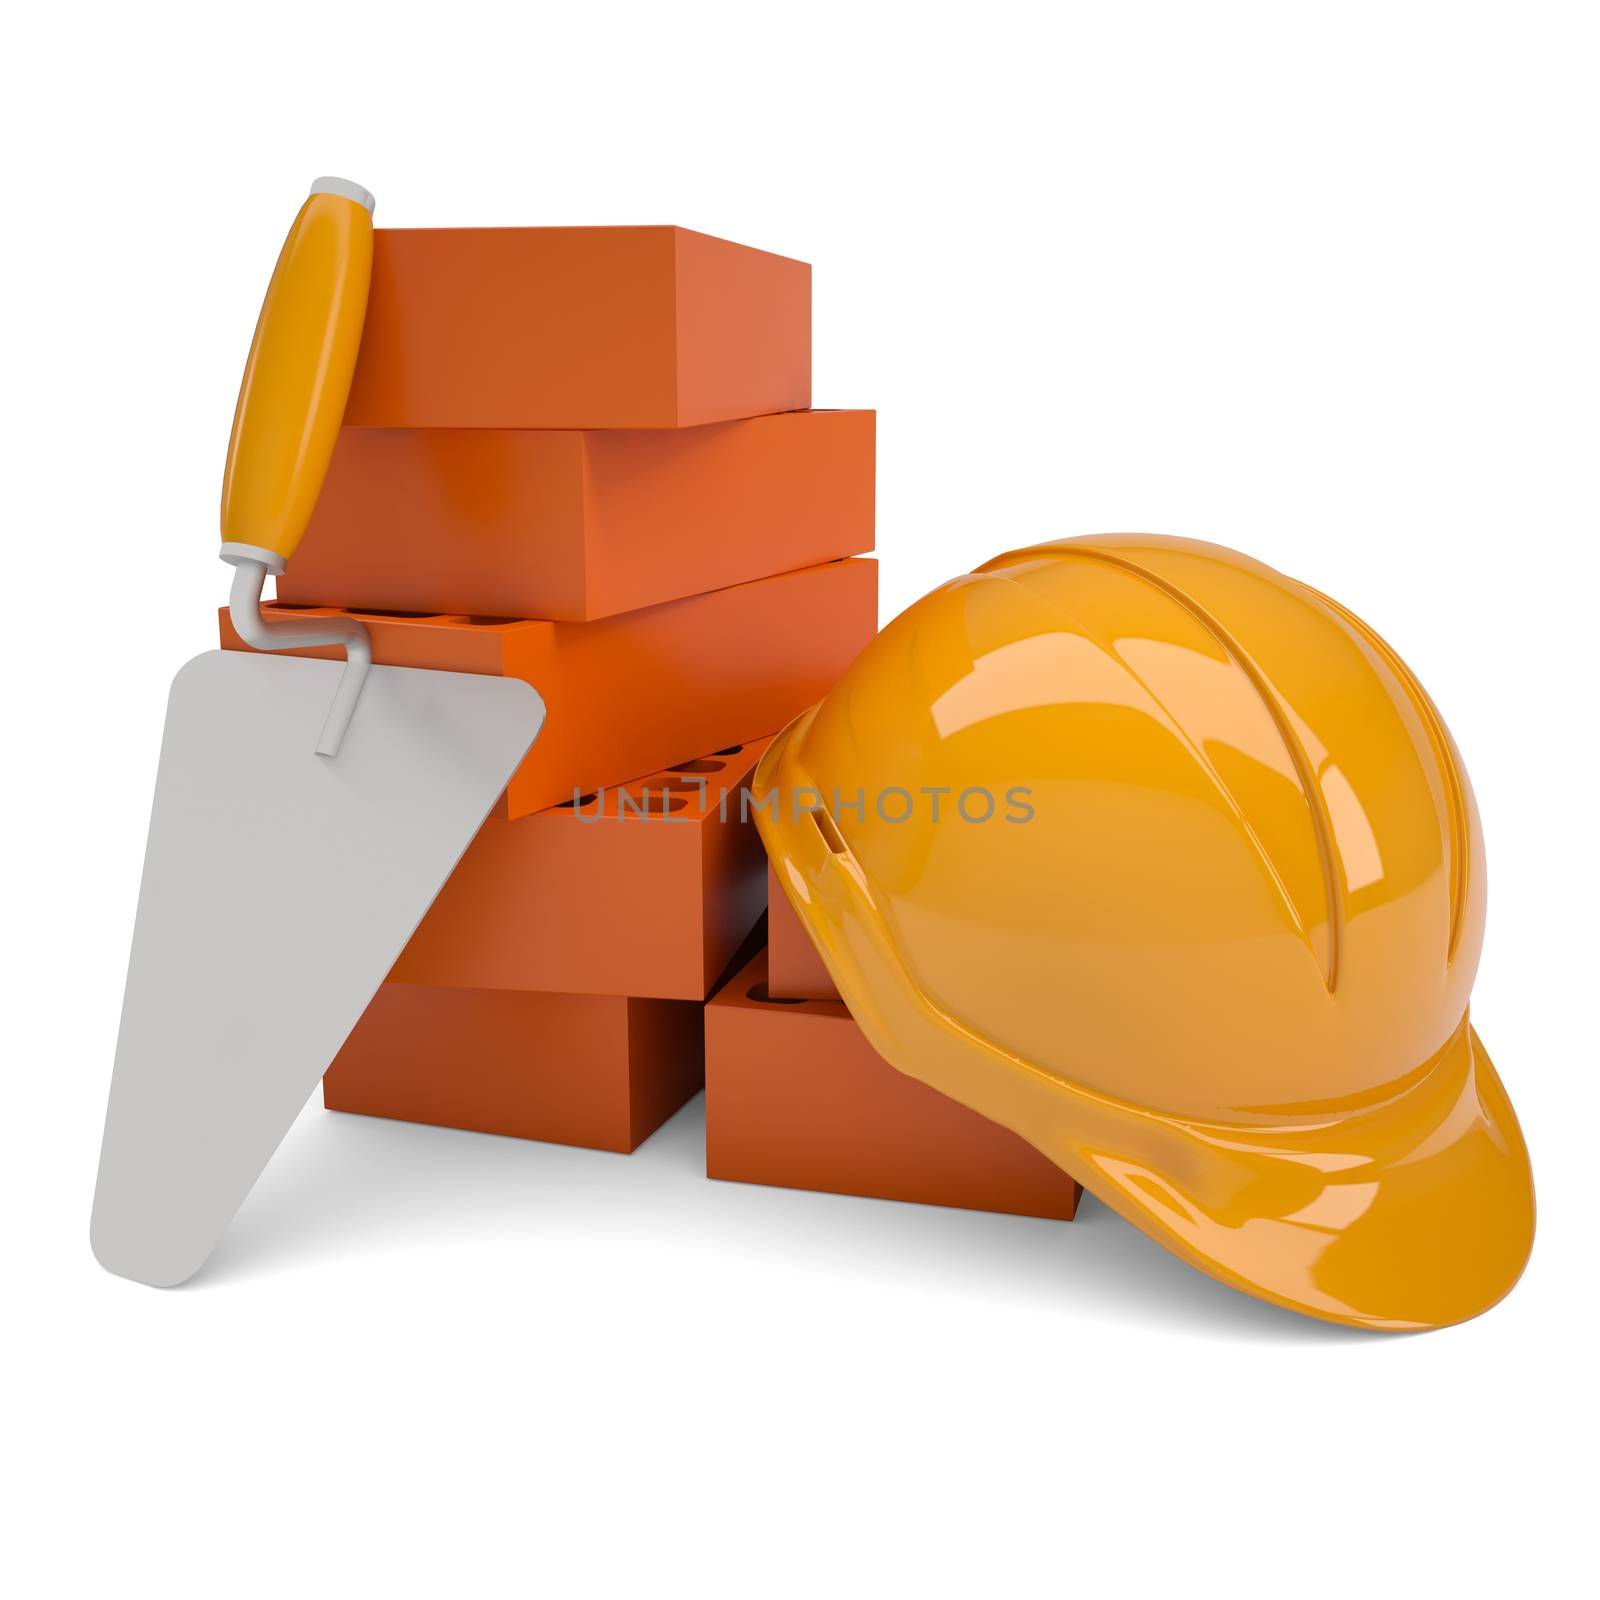 Bricks, trowel and a helmet. Isolated render on a white background